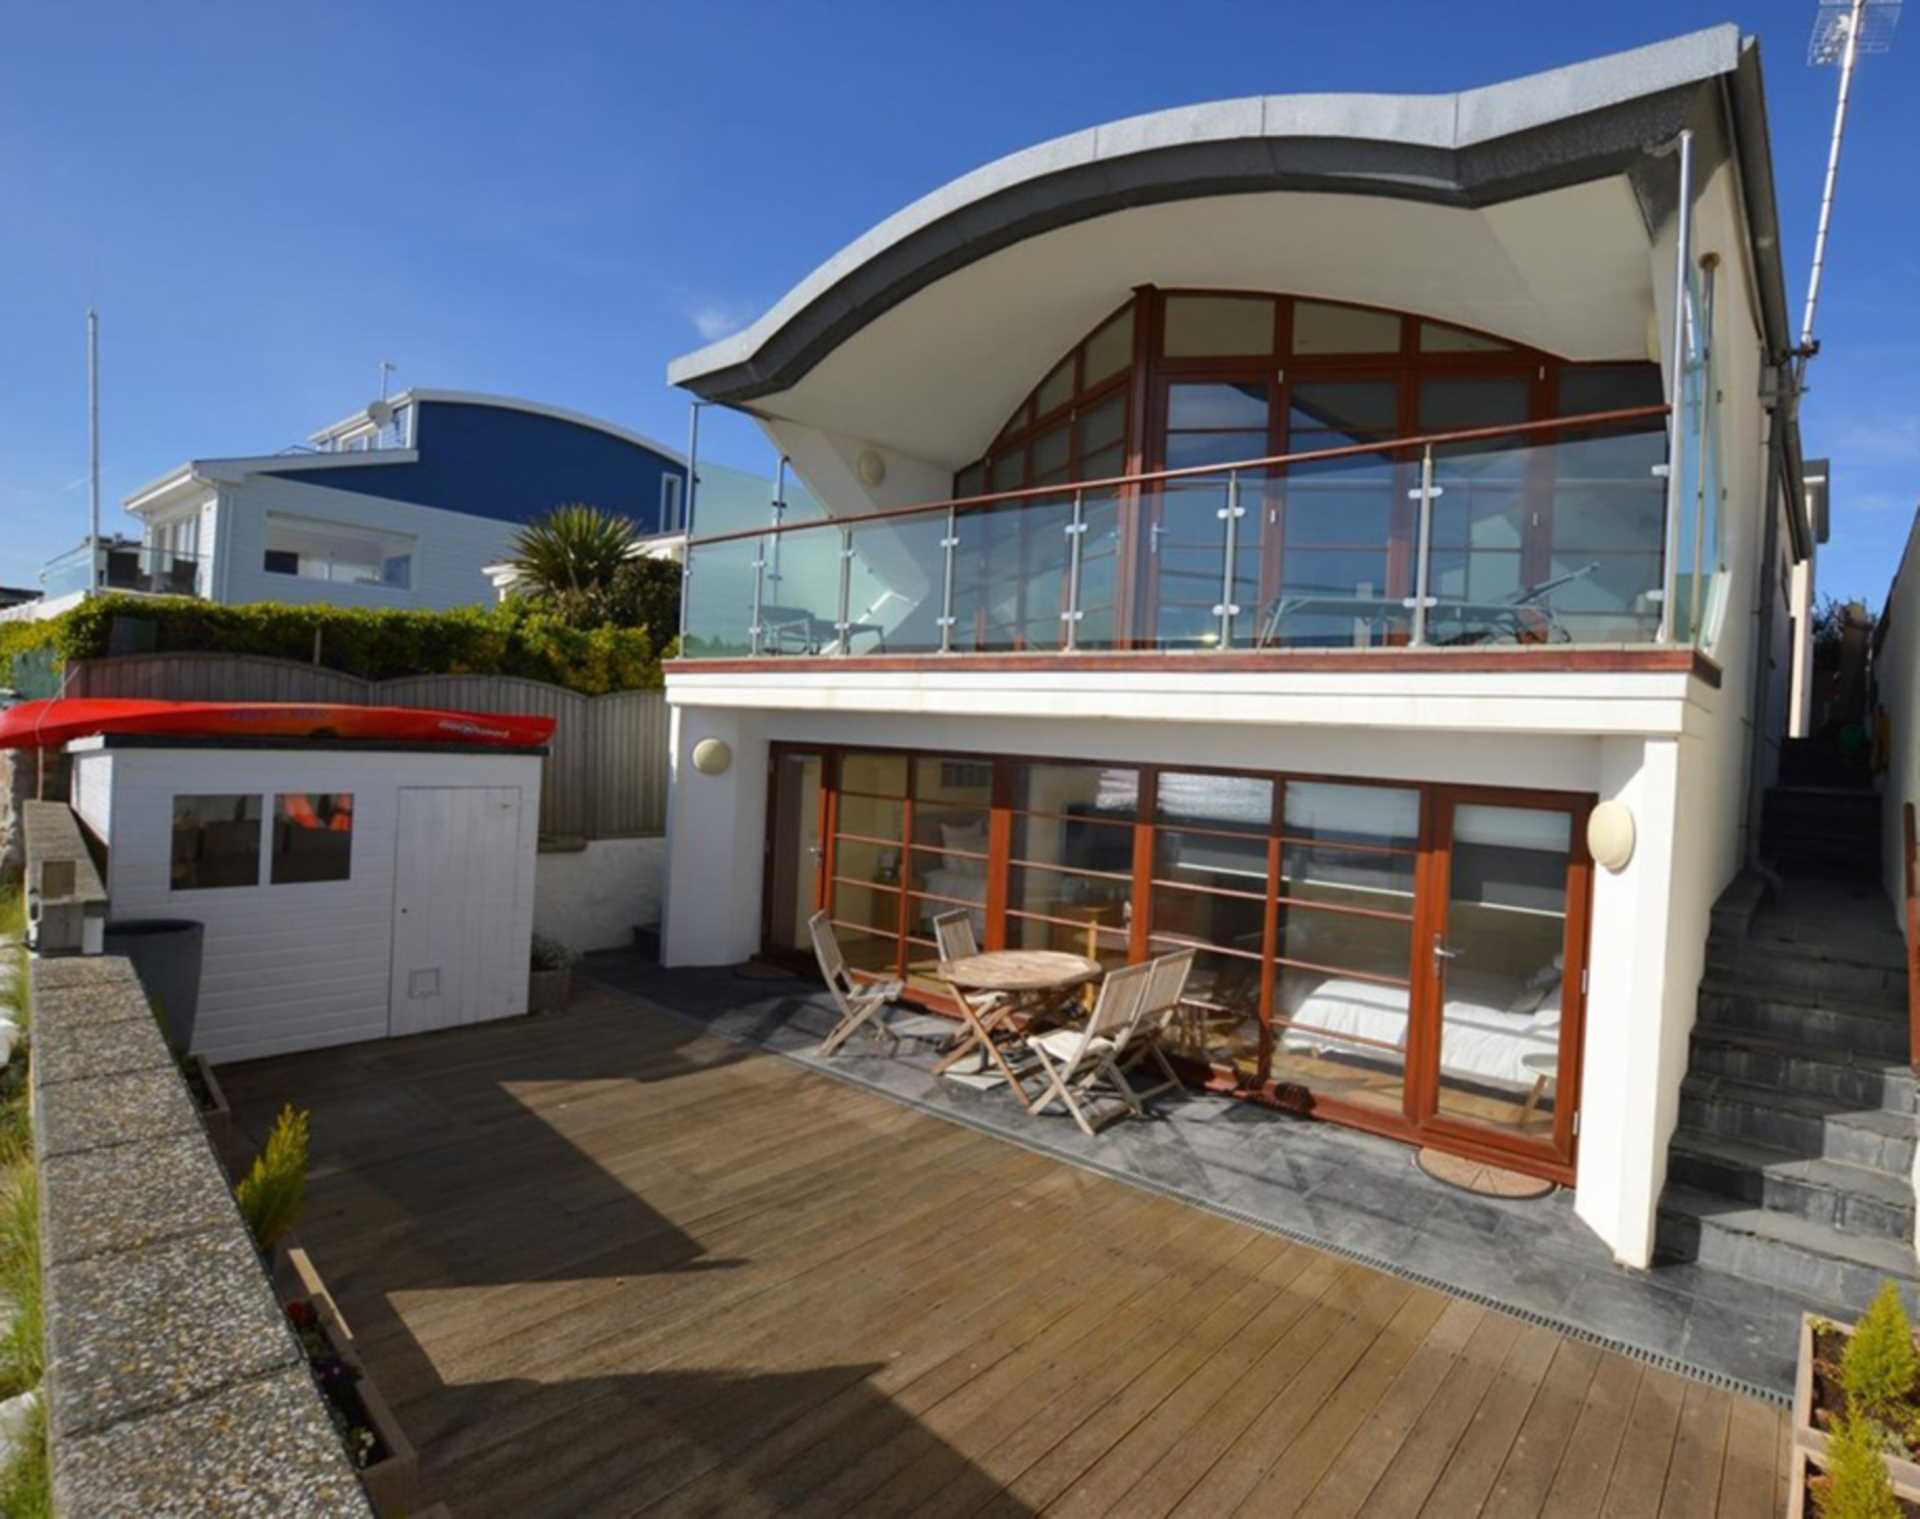 STUNNING 3 BEDROOM BEACH HOUSE TO RENT FROM JUNE JUST IN TIME FOR SUMMER ON THE BEACH, Image 1